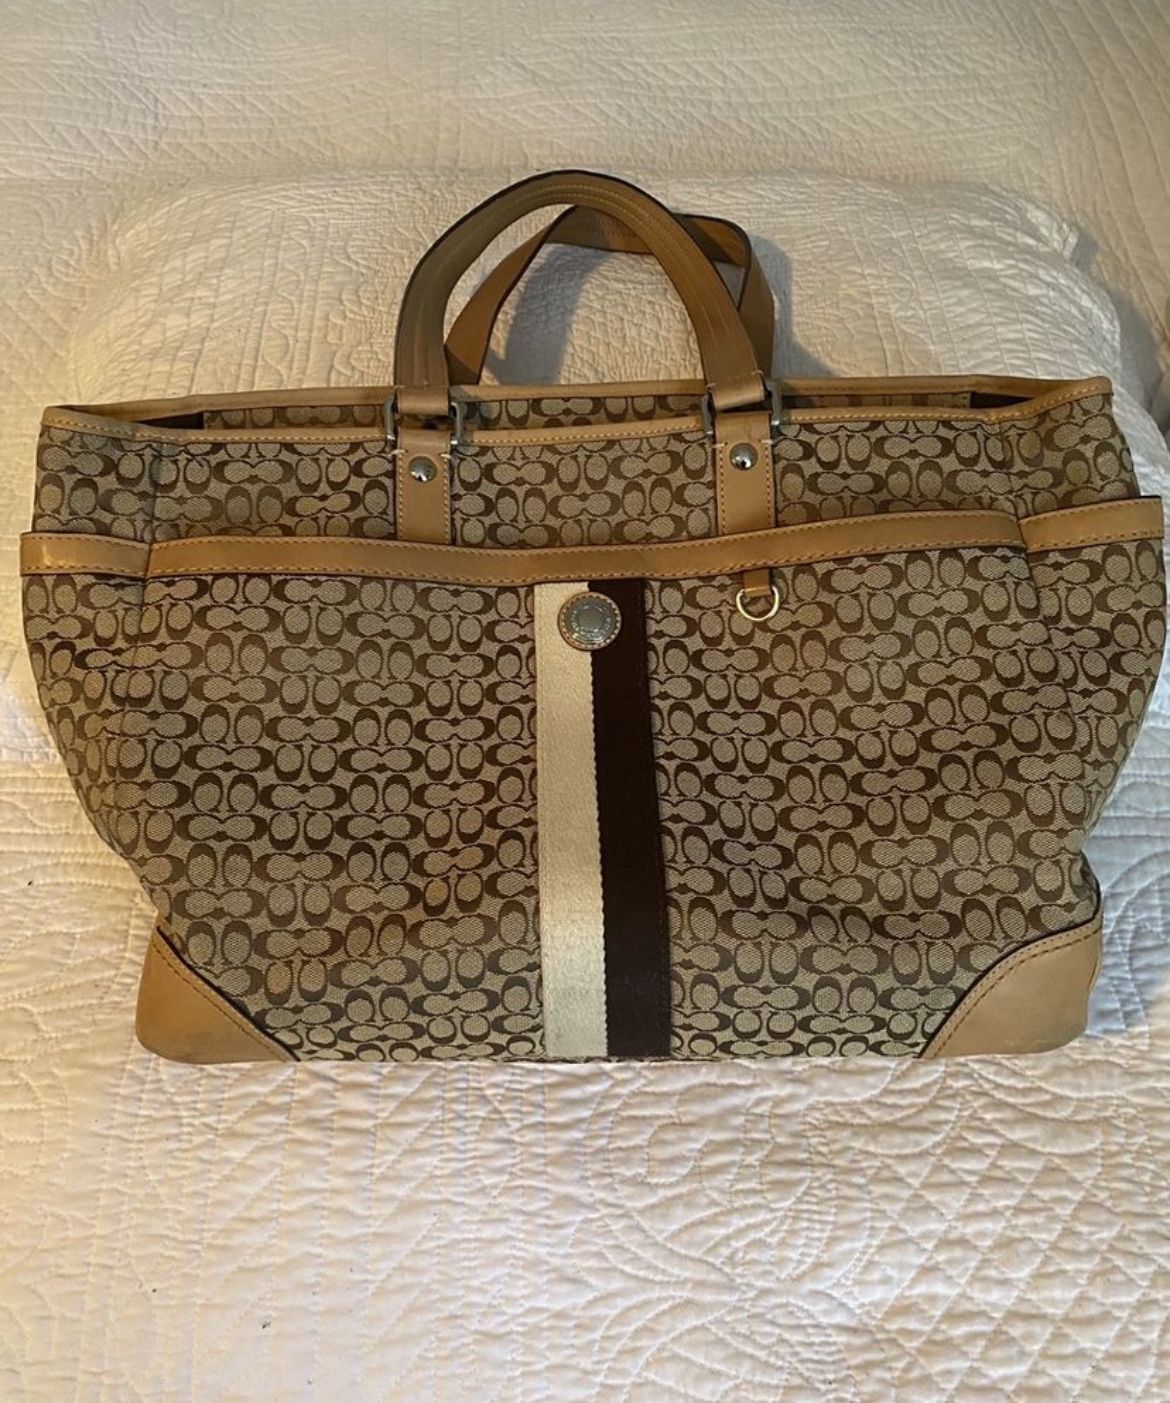 Coach Voyager Tote $50 OBO